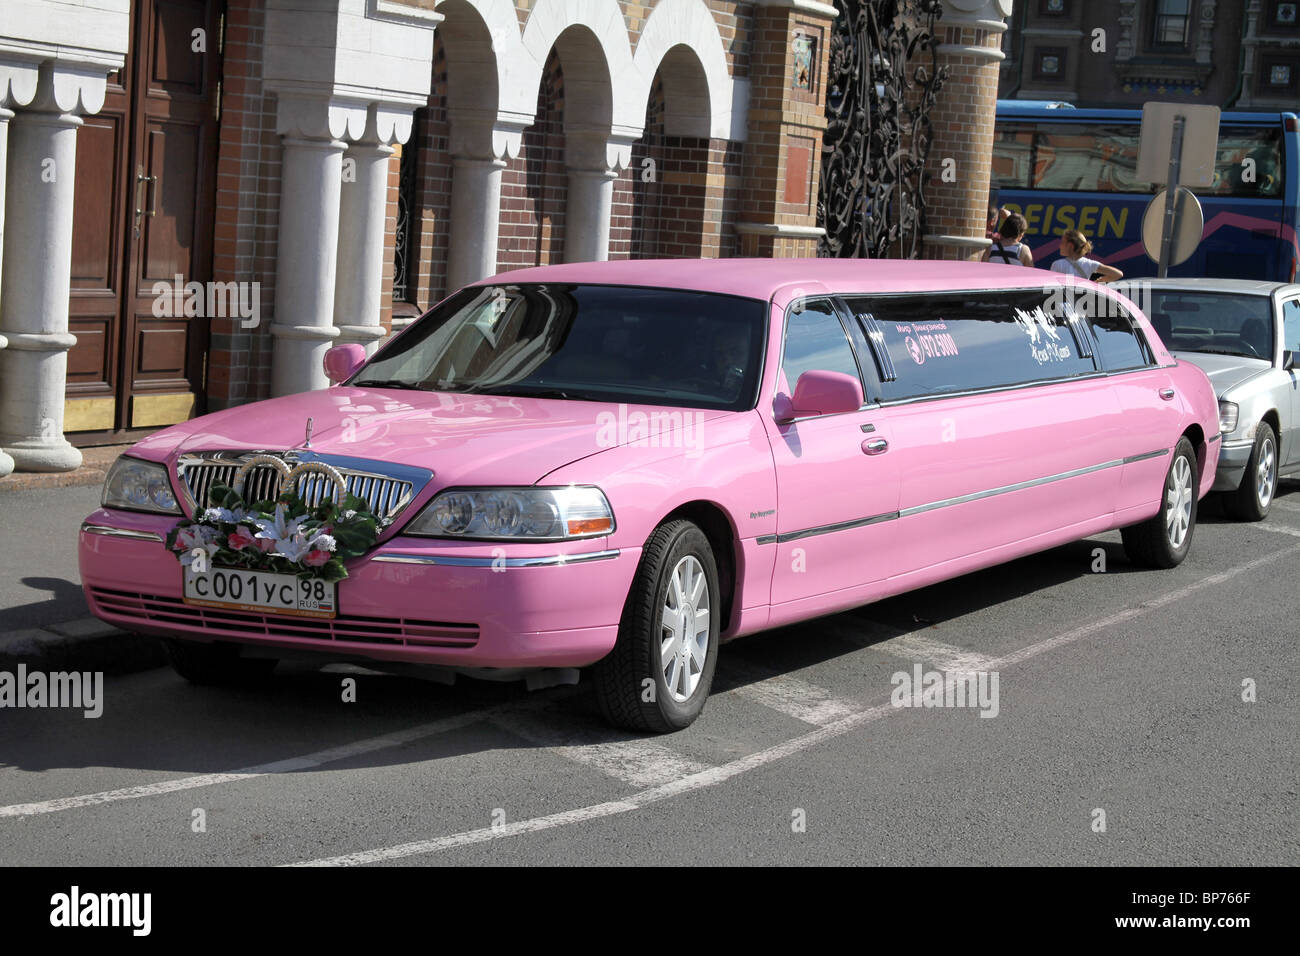 A pink stretch limousine car in St. Petersburg, Russia Stock Photo